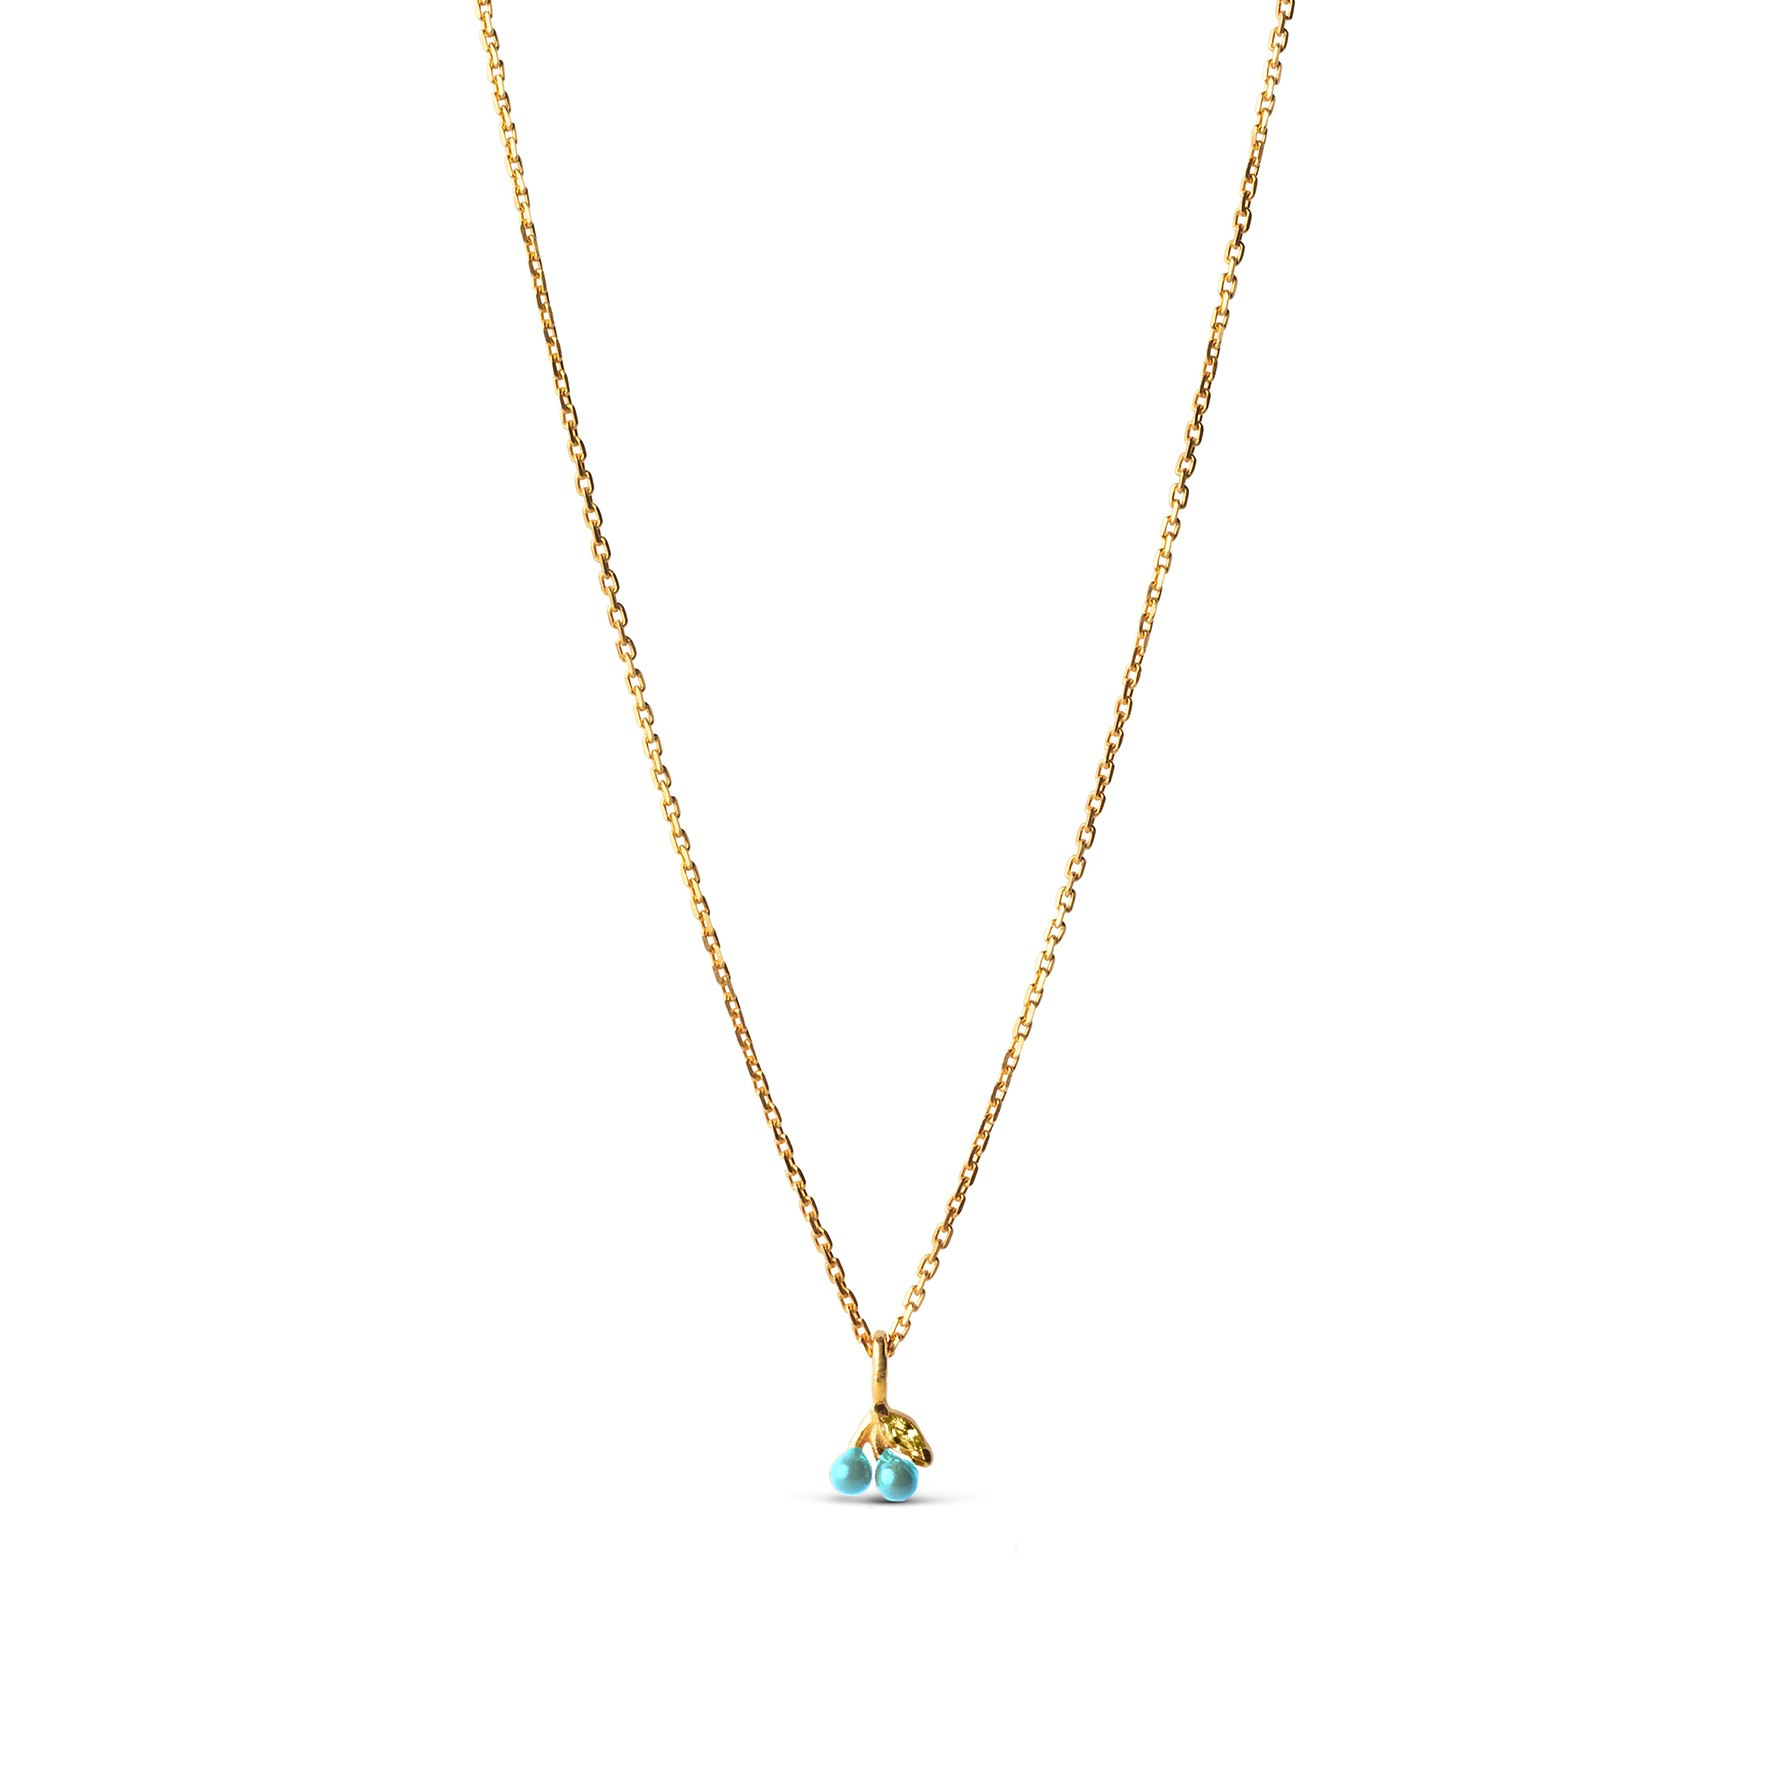 Cherry Necklace Icy Blue from Enamel Copenhagen in Goldplated-Silver Sterling 925